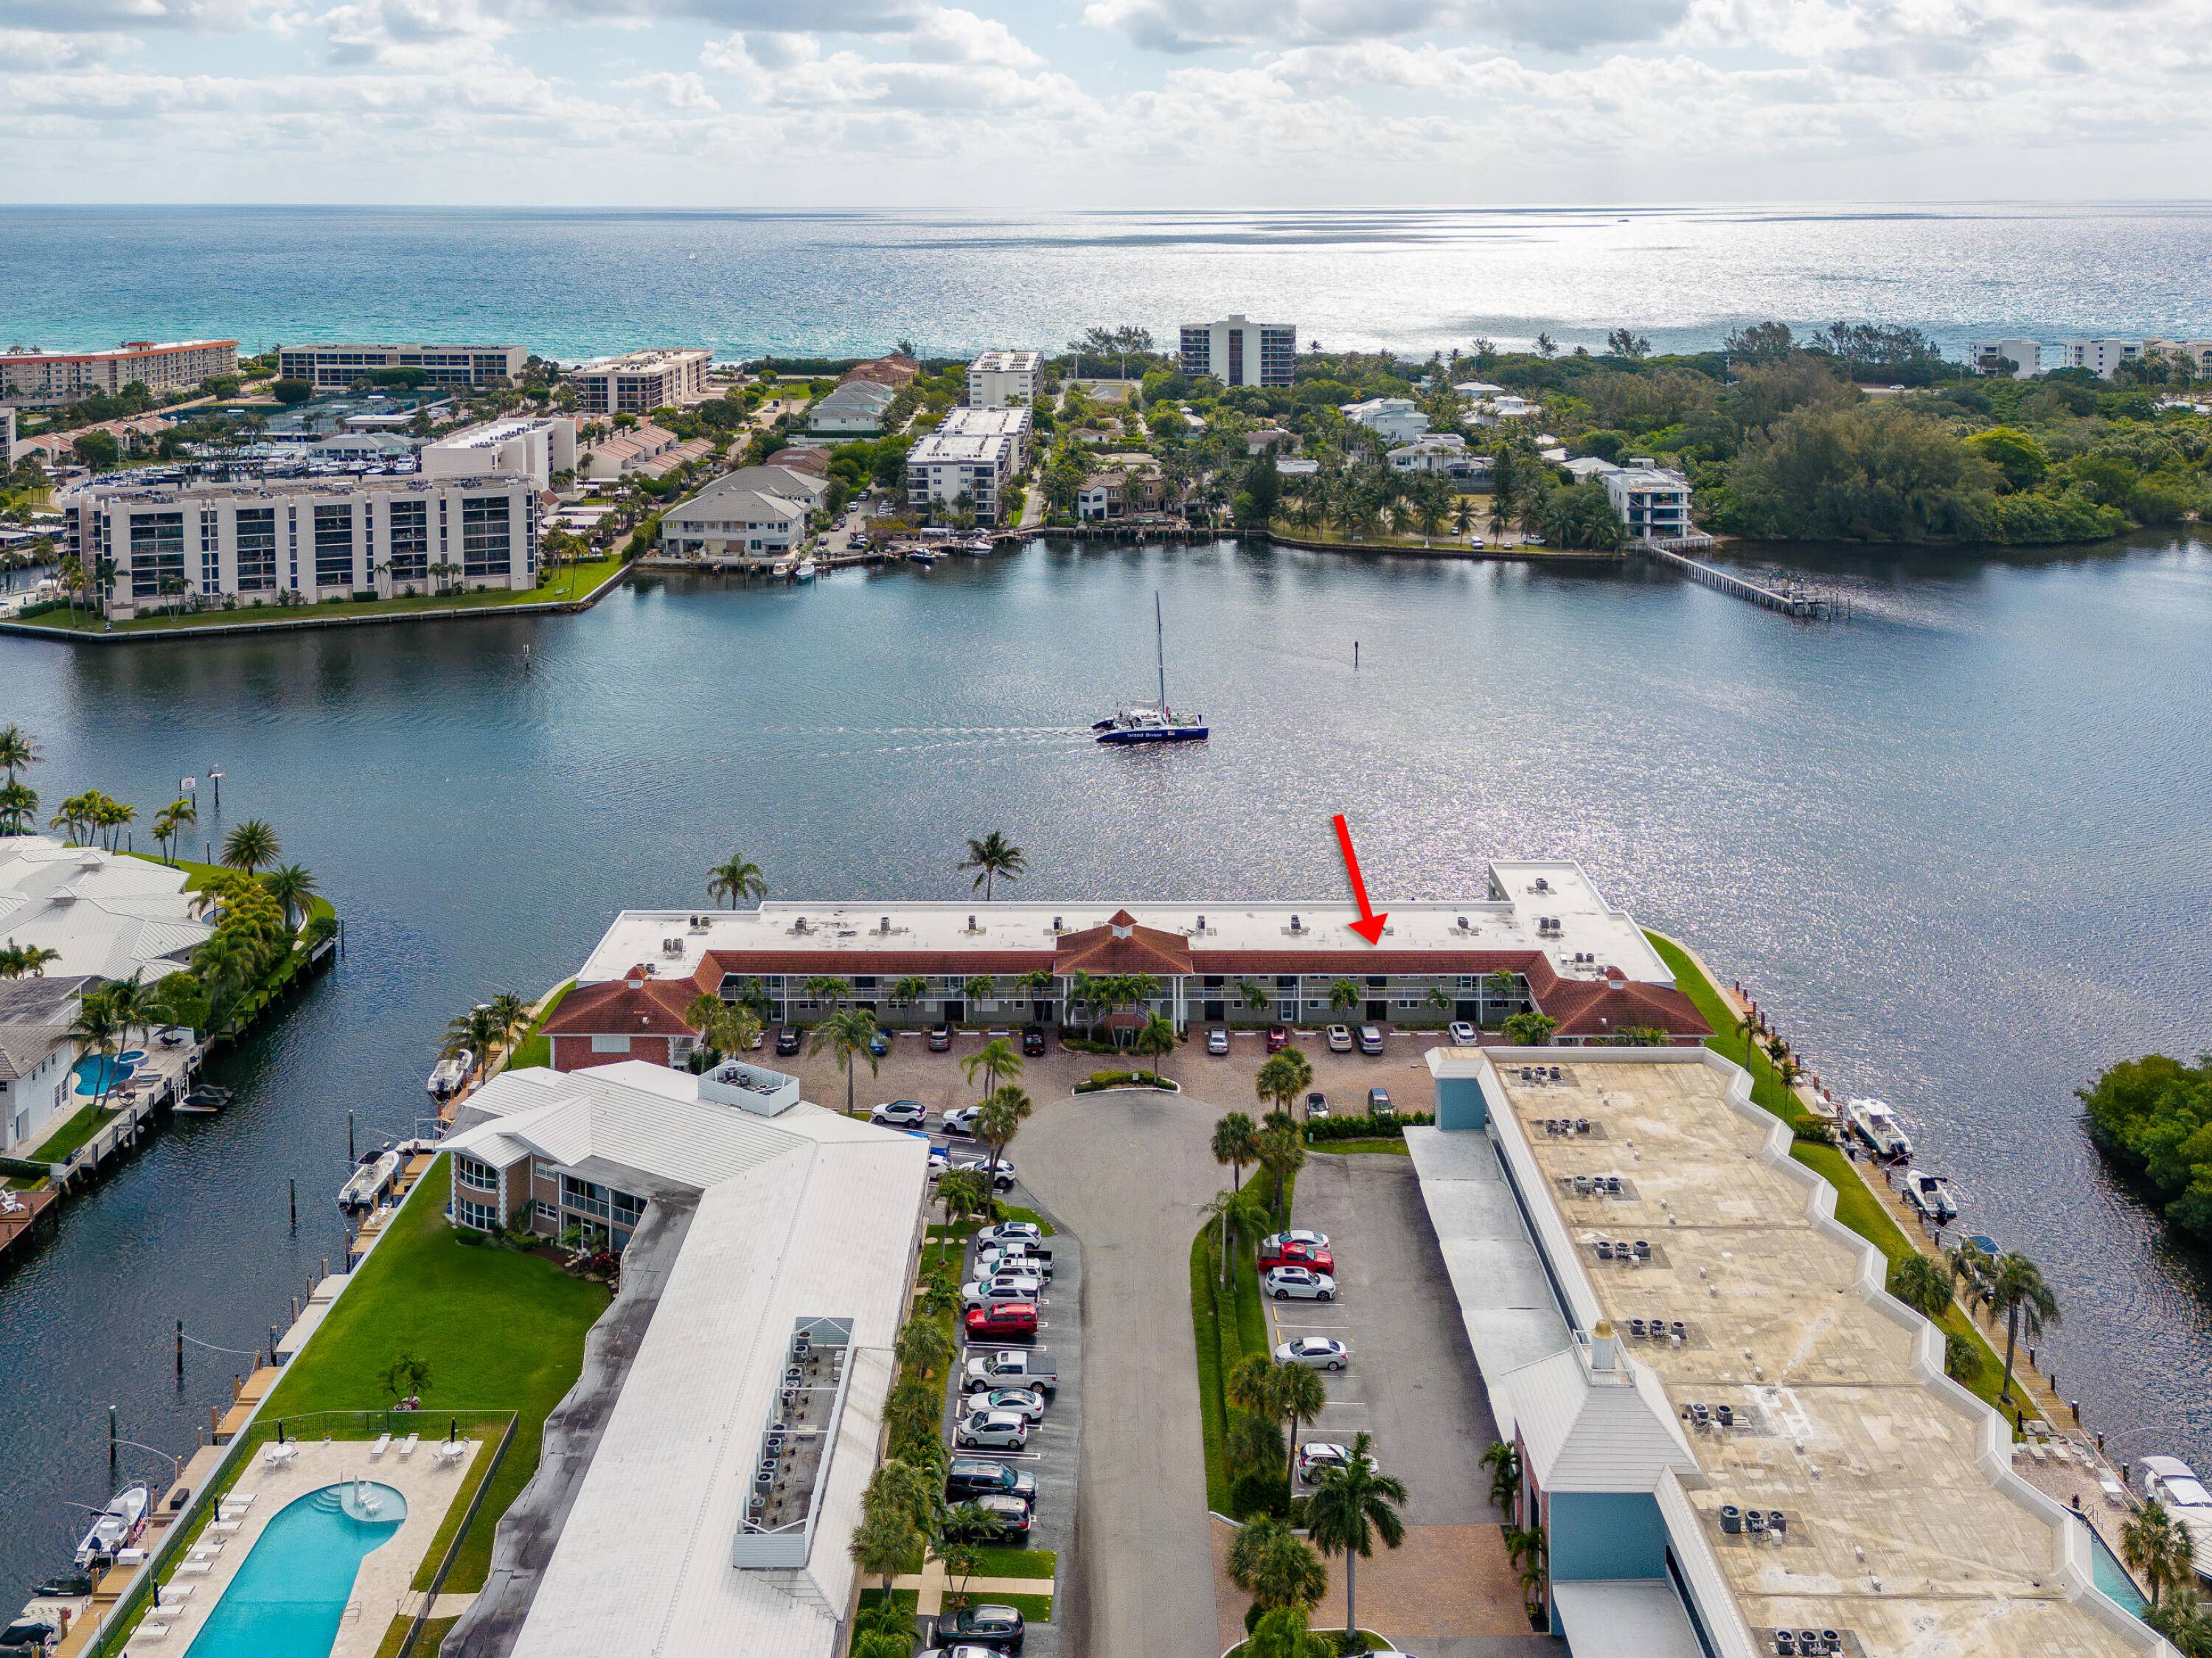 Discover unparalleled luxury living in this exquisite 2 bedroom, 2 bathroom fully remodeled condo overlooking the picturesque Intracoastal Waterway in Boca Raton.